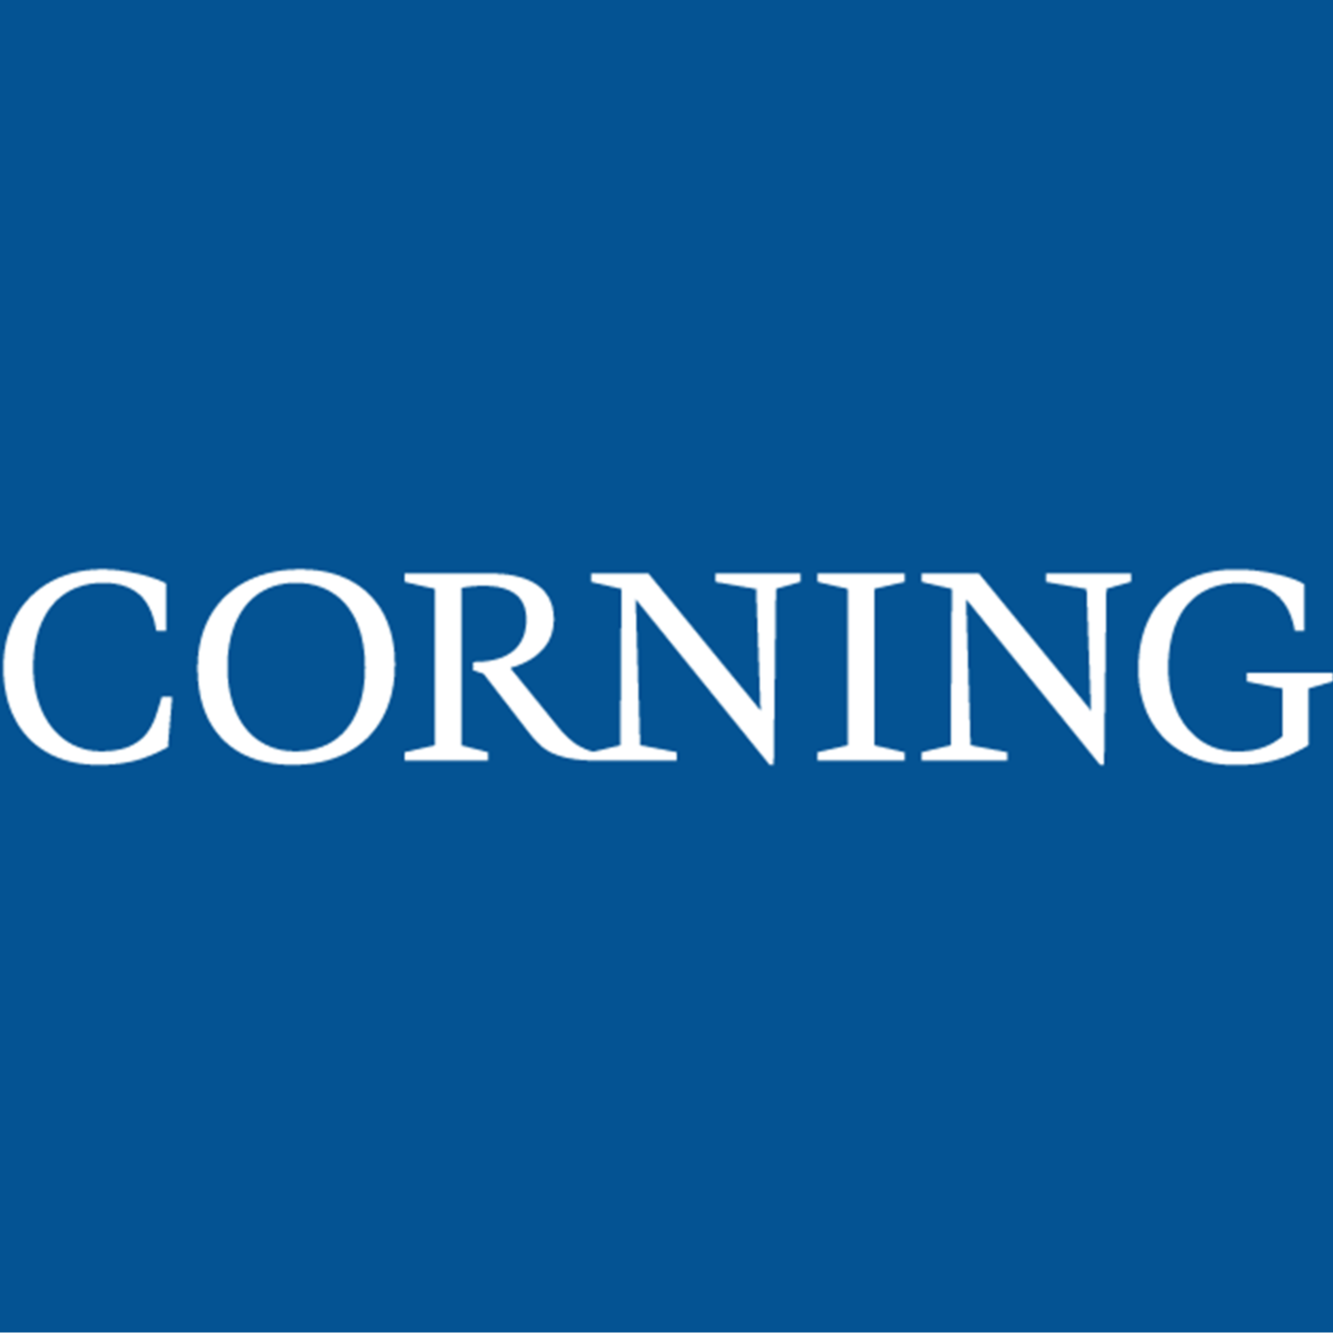 Corning® Trimming Solution, Islet Solutions and Reagents